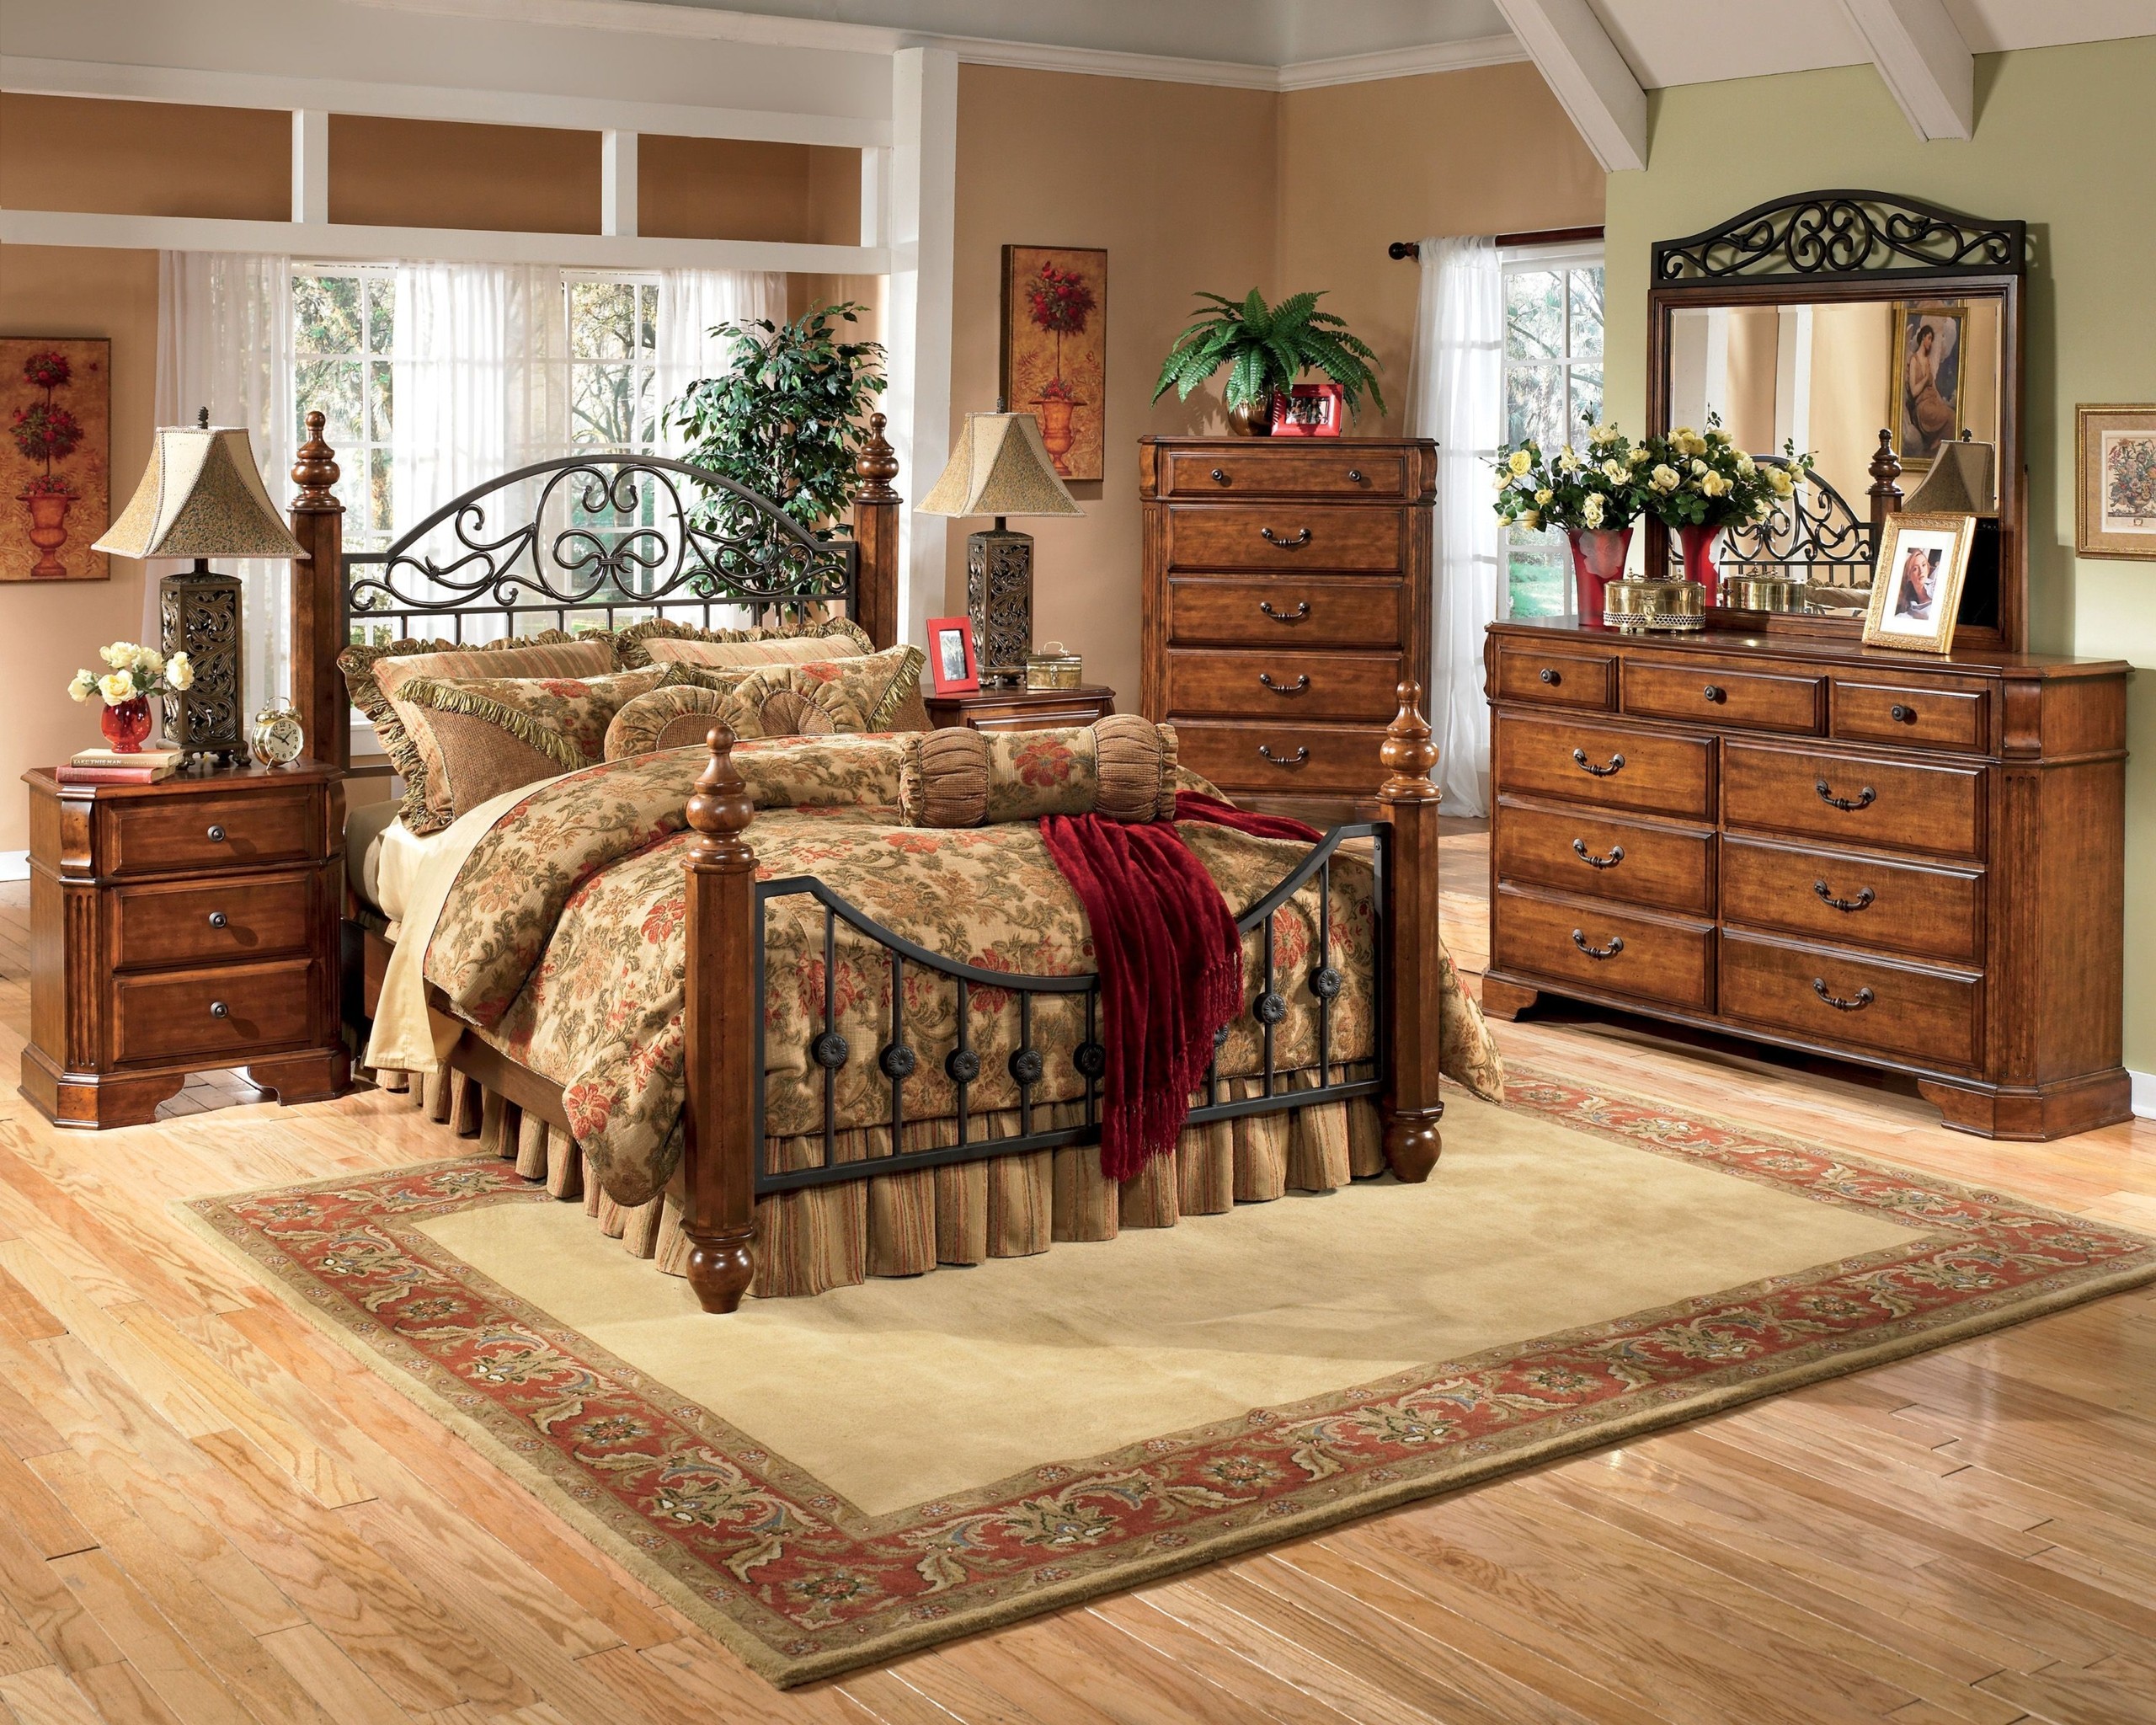 Wood And Wrought Iron Bedroom Sets - Ideas on Foter